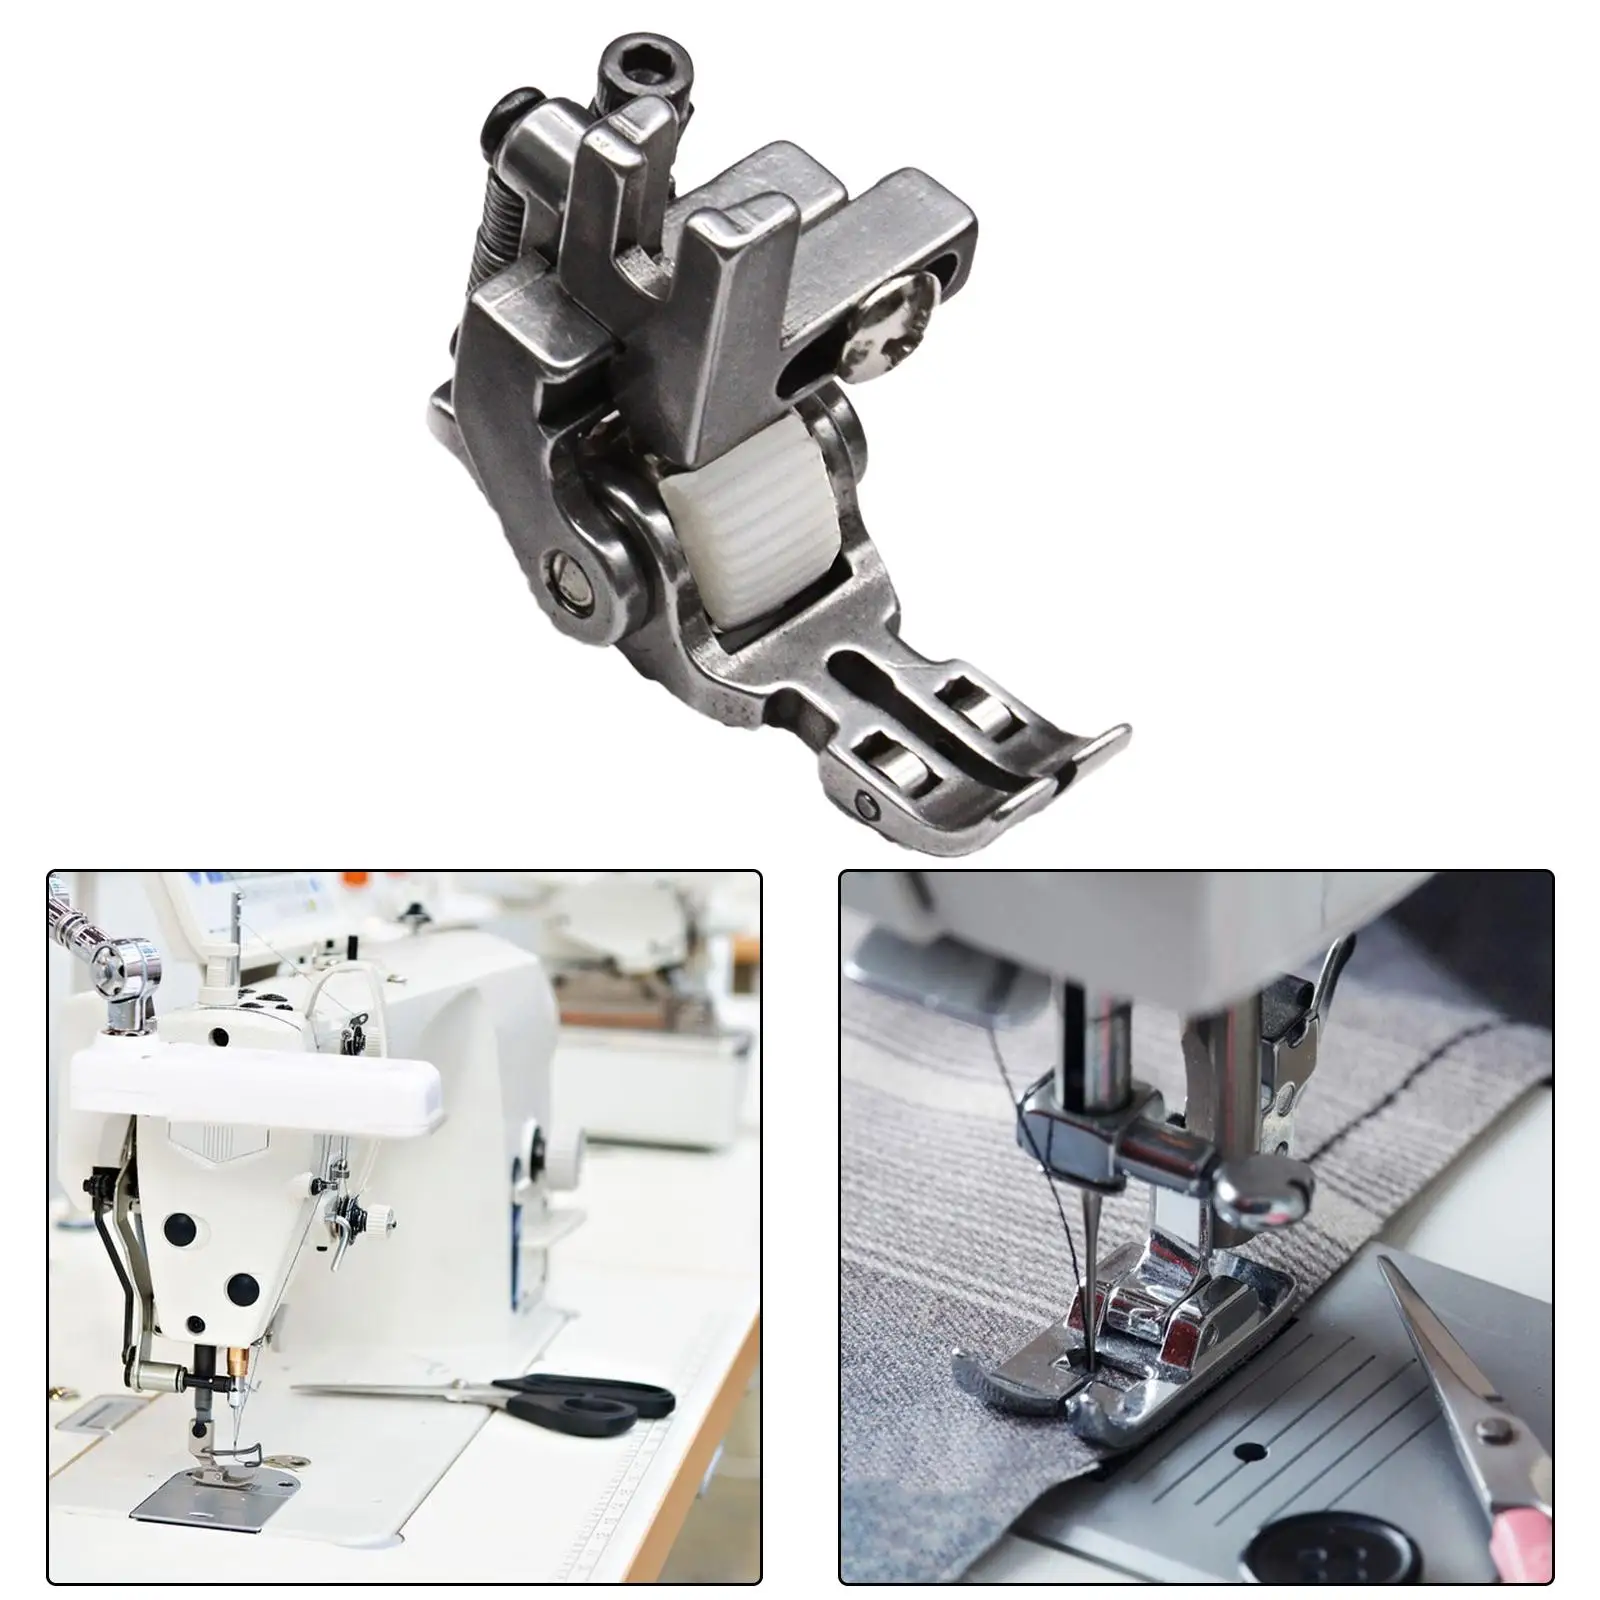 Presser Foot for Industrial Sewing Machine, Edge Stitching Foot Auxiliary Presser Foot for Thick Fabric, Leather, Chiffon, Jeans